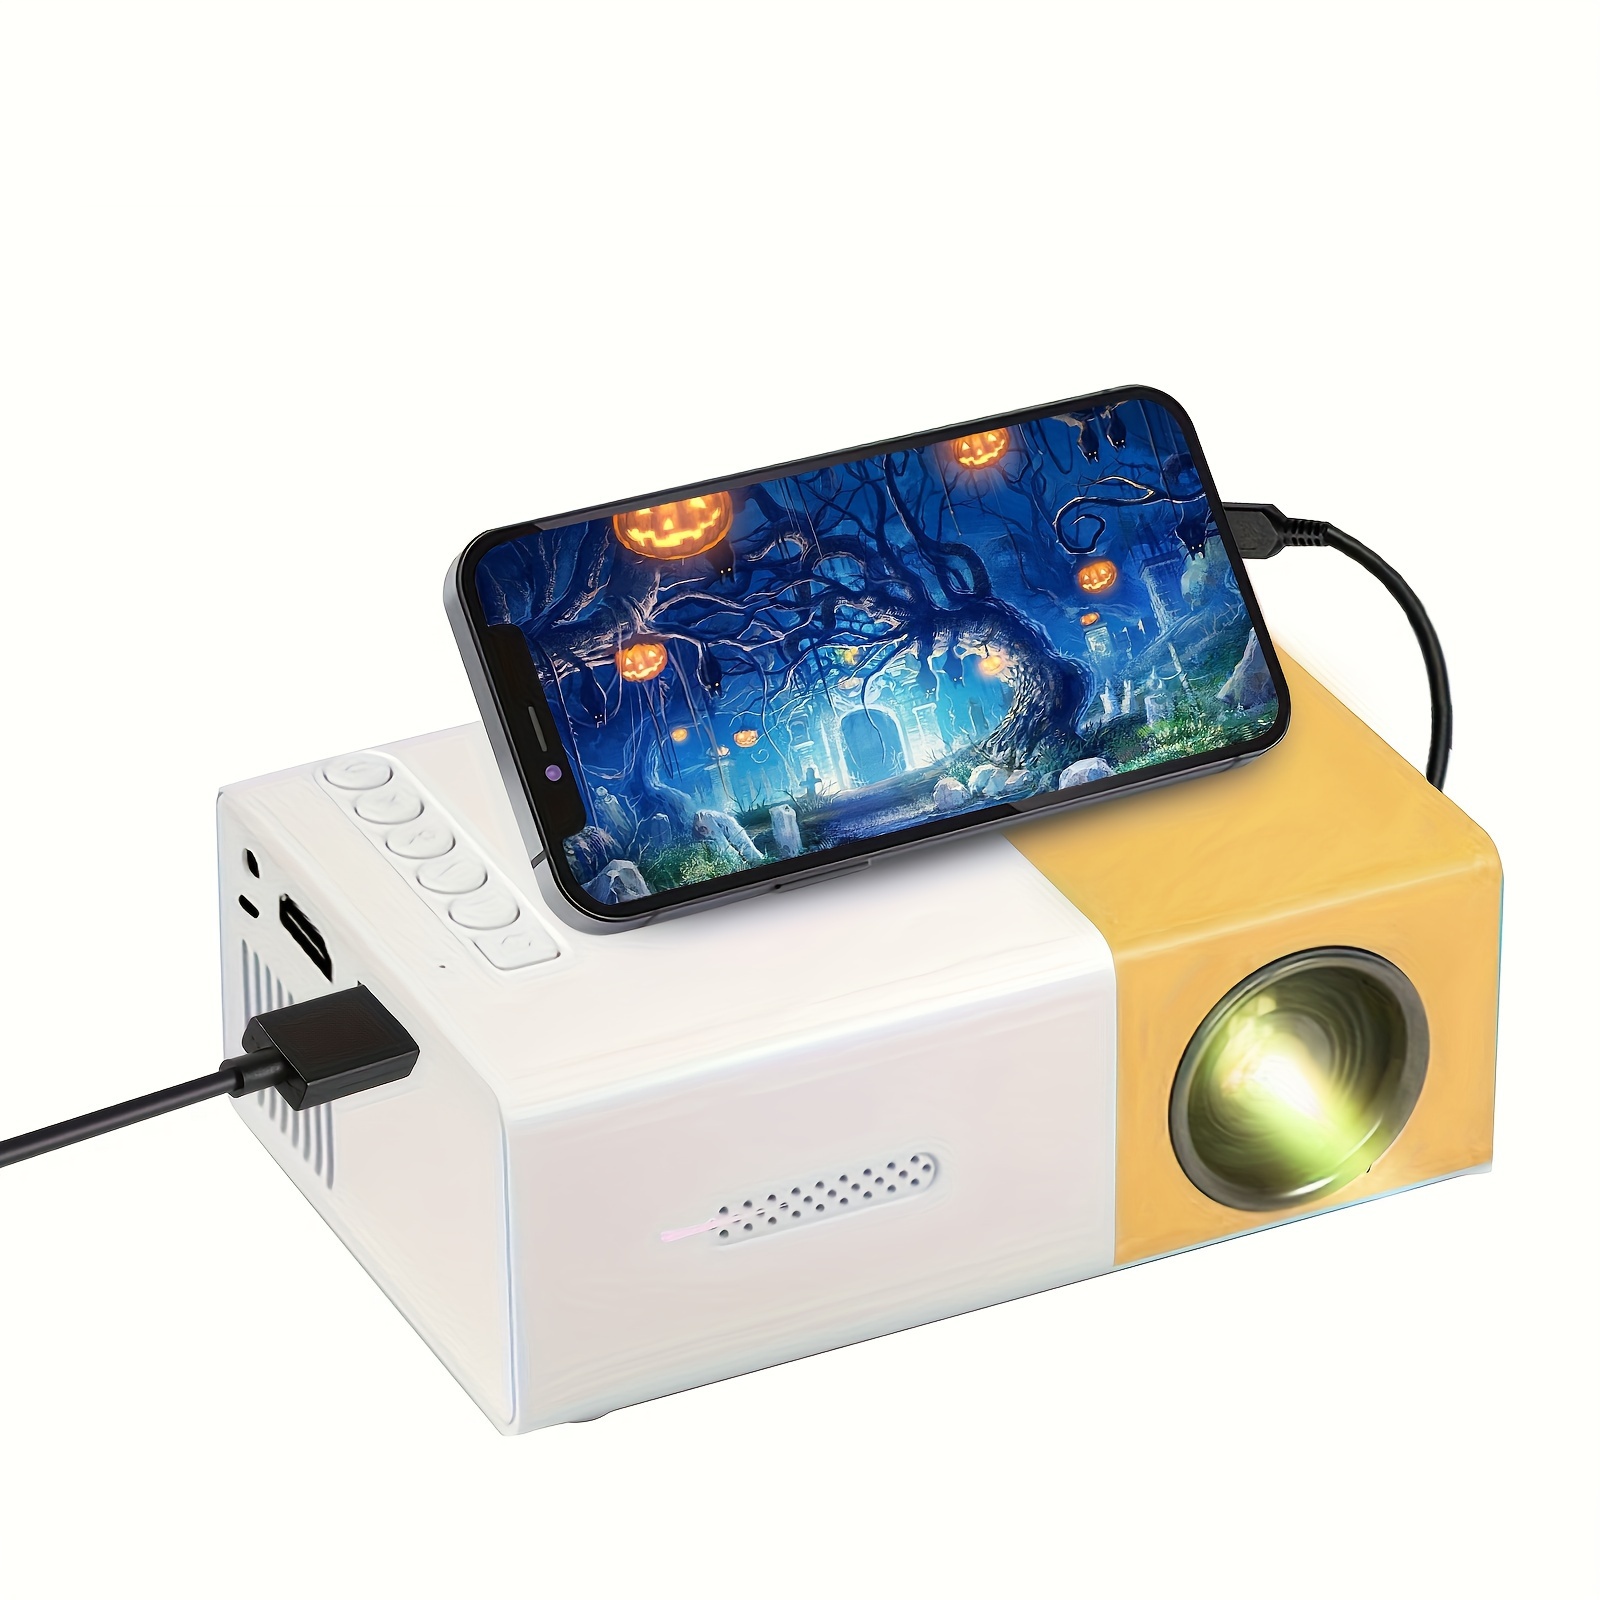 Projector, mini Projector, Projectors, 4k Projector, portable Projector, short throw projector, home cinema projector, tv projector, home  projector, projector tv